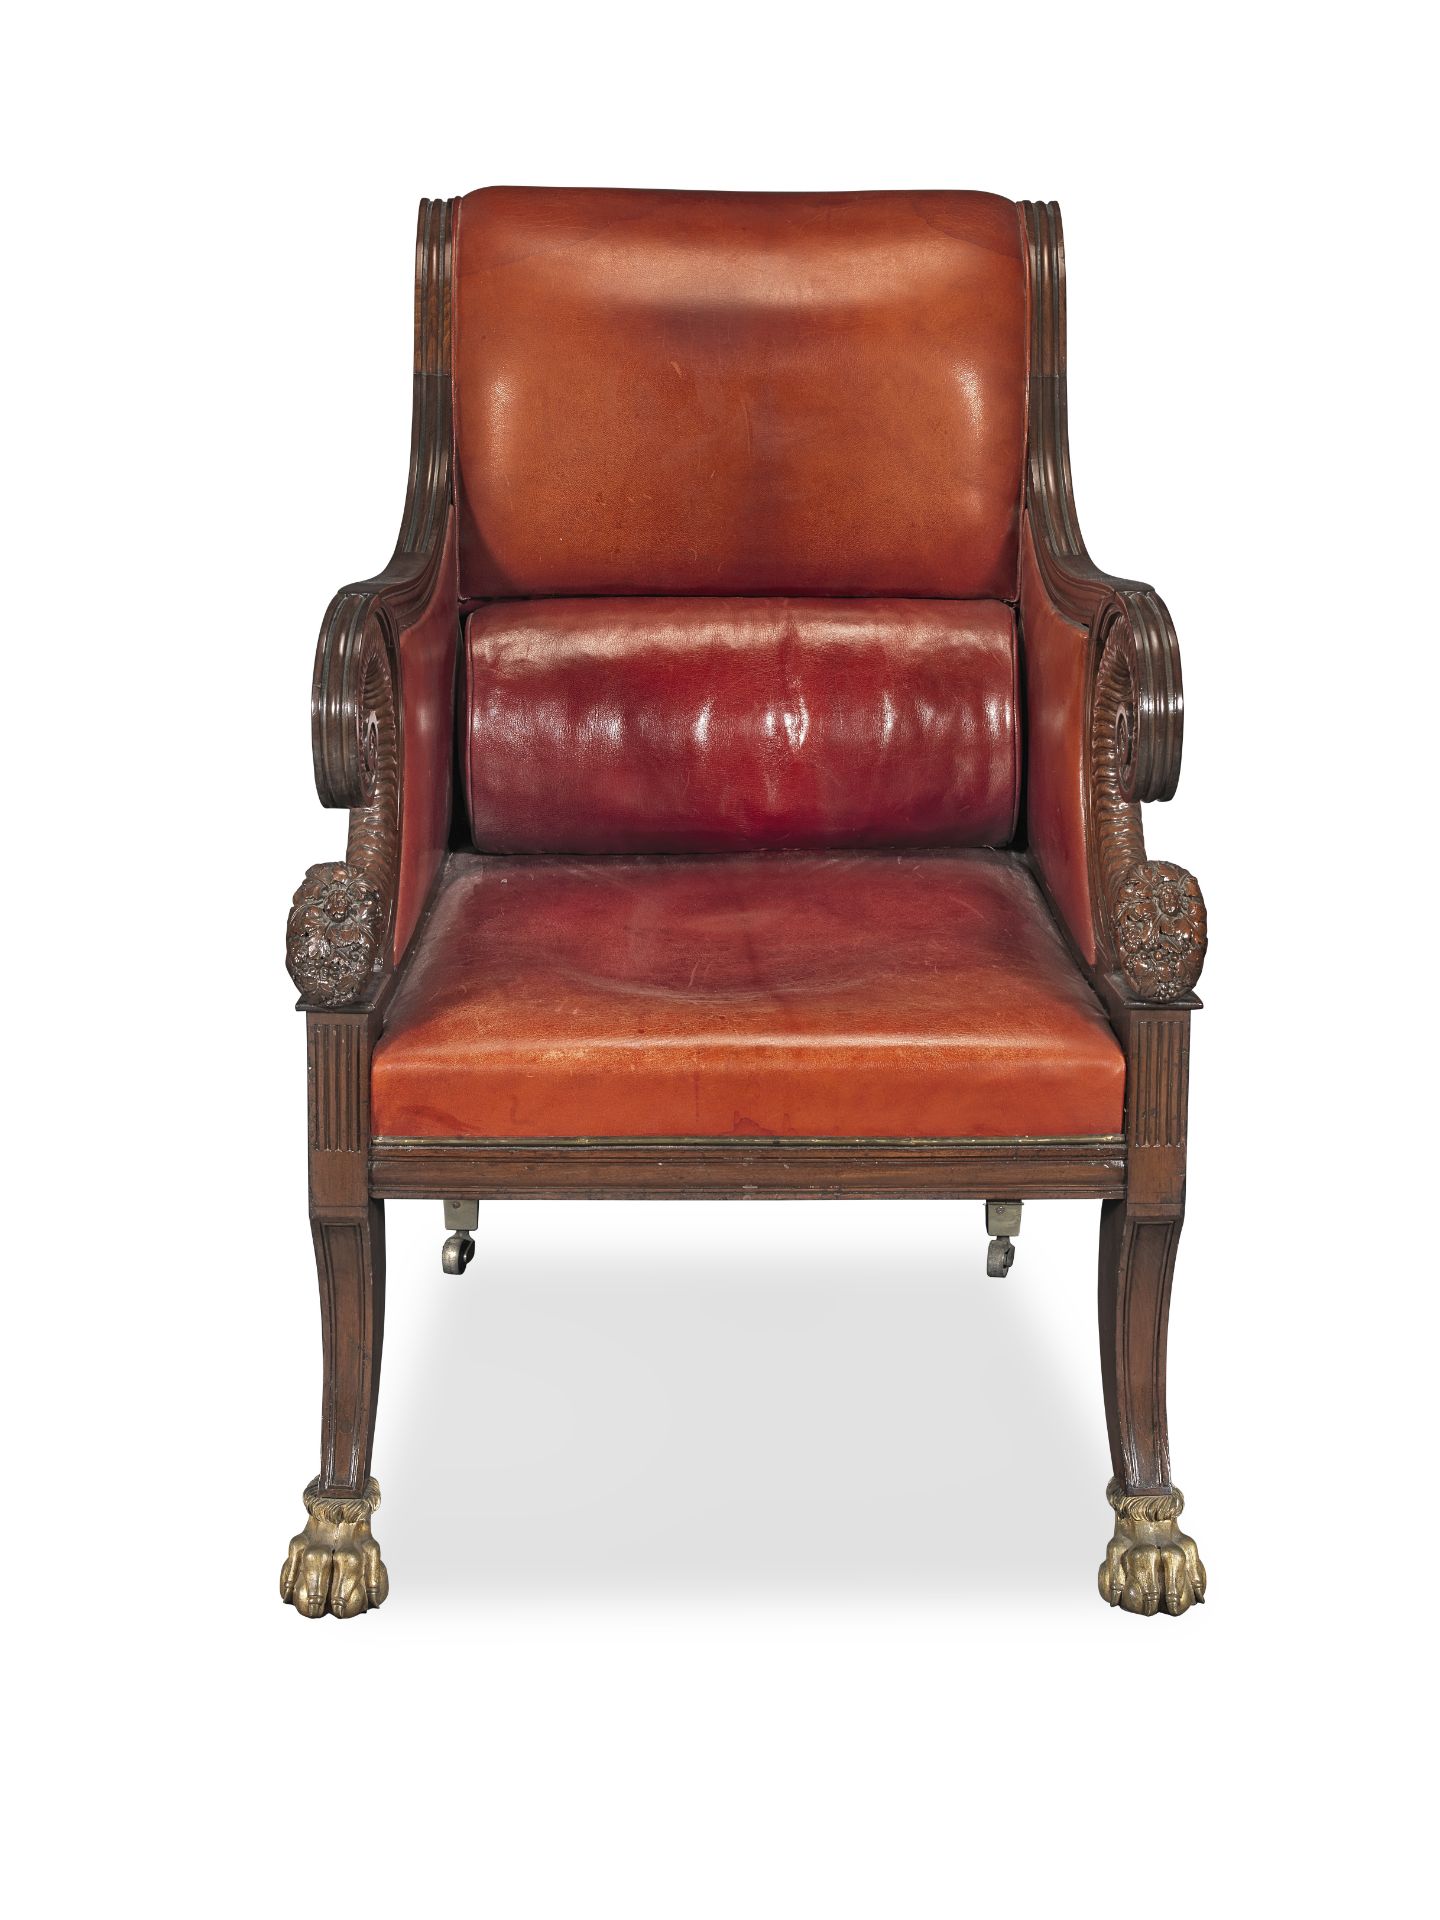 A large and impressive late 19th century Regency revival mahogany bergere